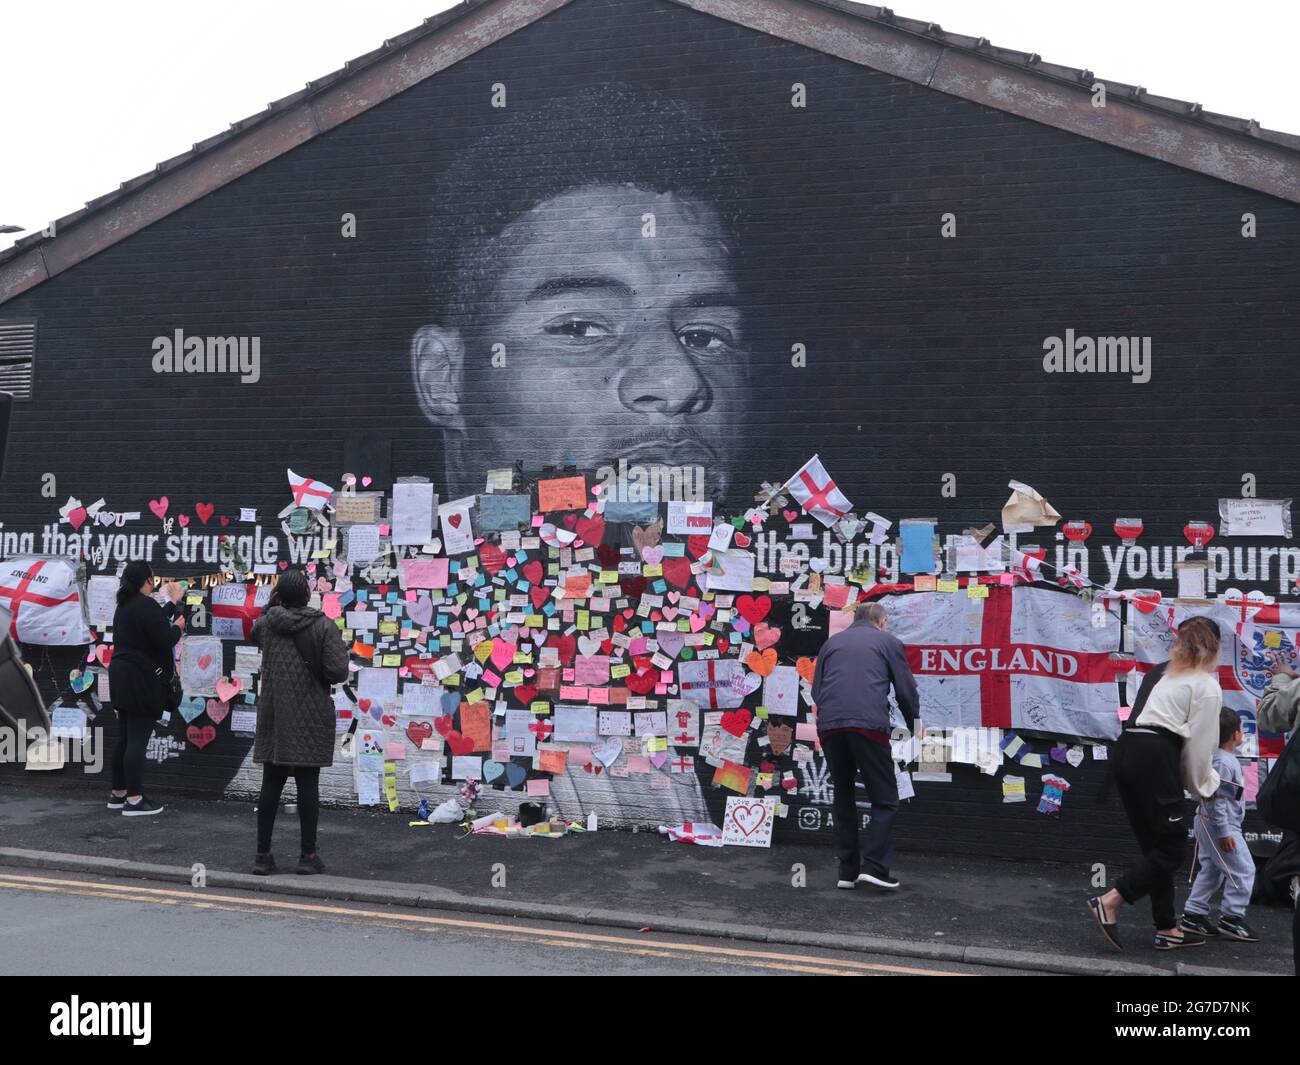 Manchester England 13 July 2021 Mural of Marcus Rashford adorned with messages of goodwill and support. ©Alamy Stock Photo